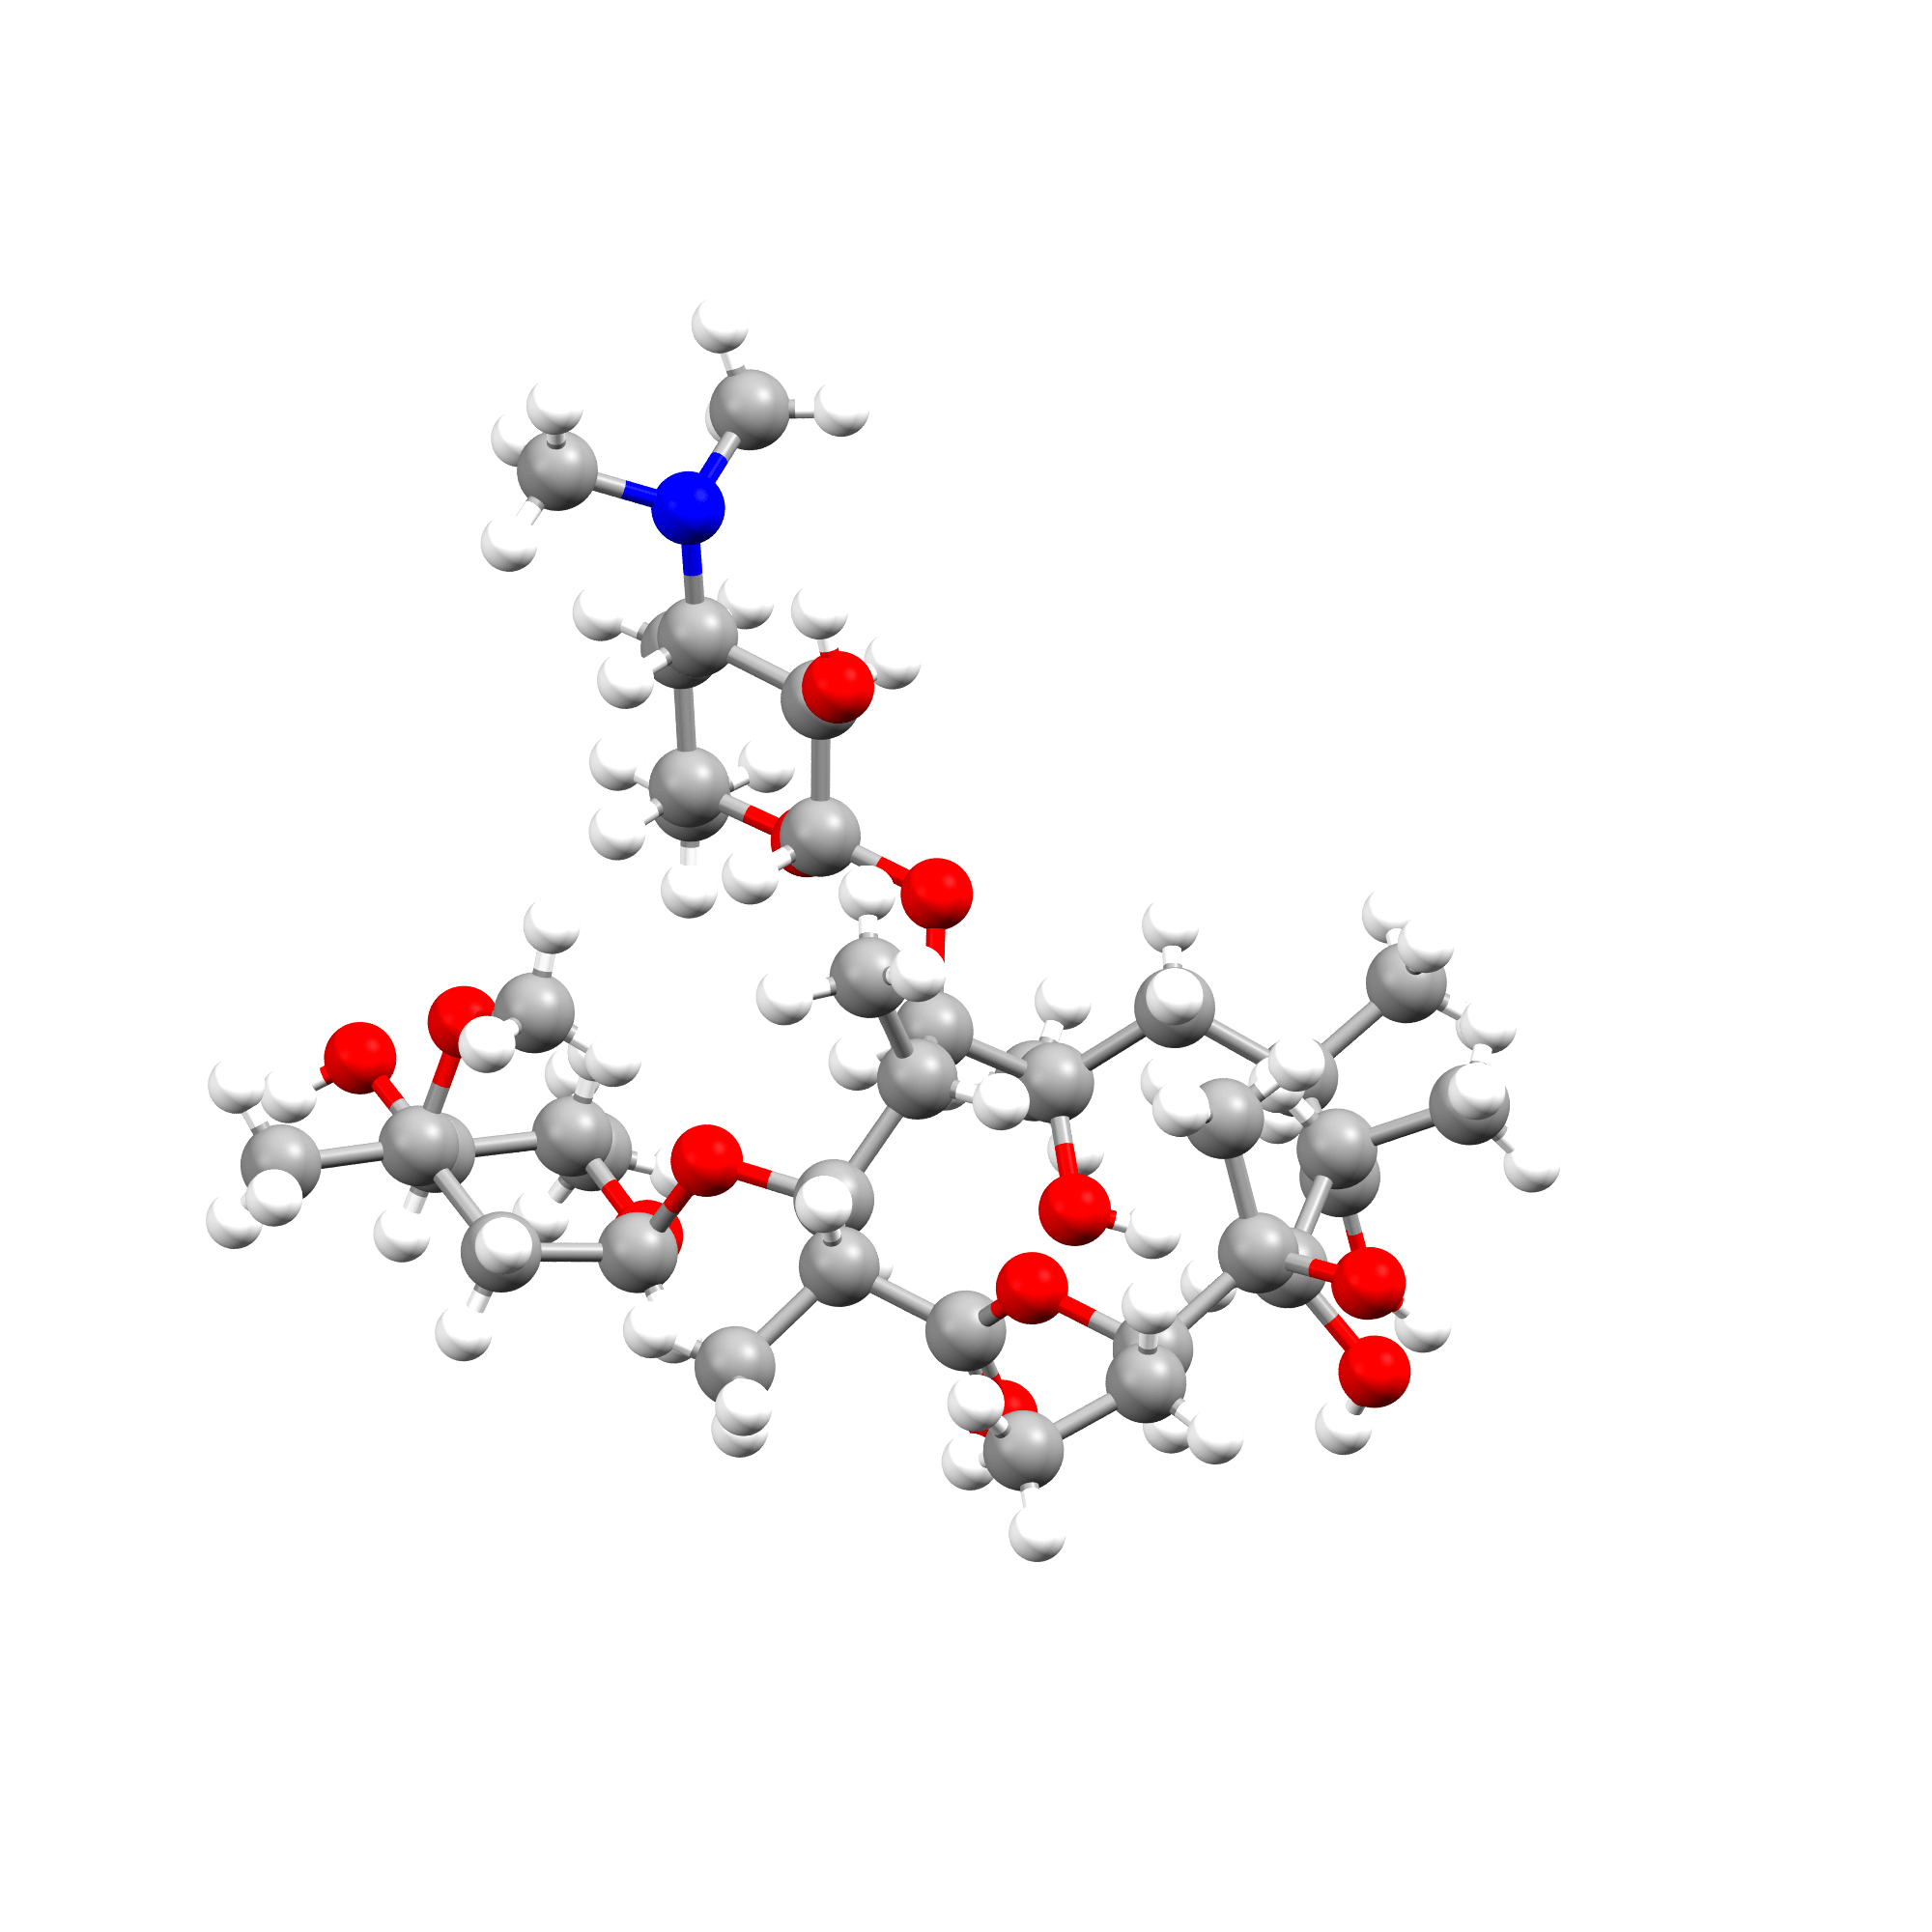 Ball and Stick depiction of Erythromycin, refcode QIFKEX